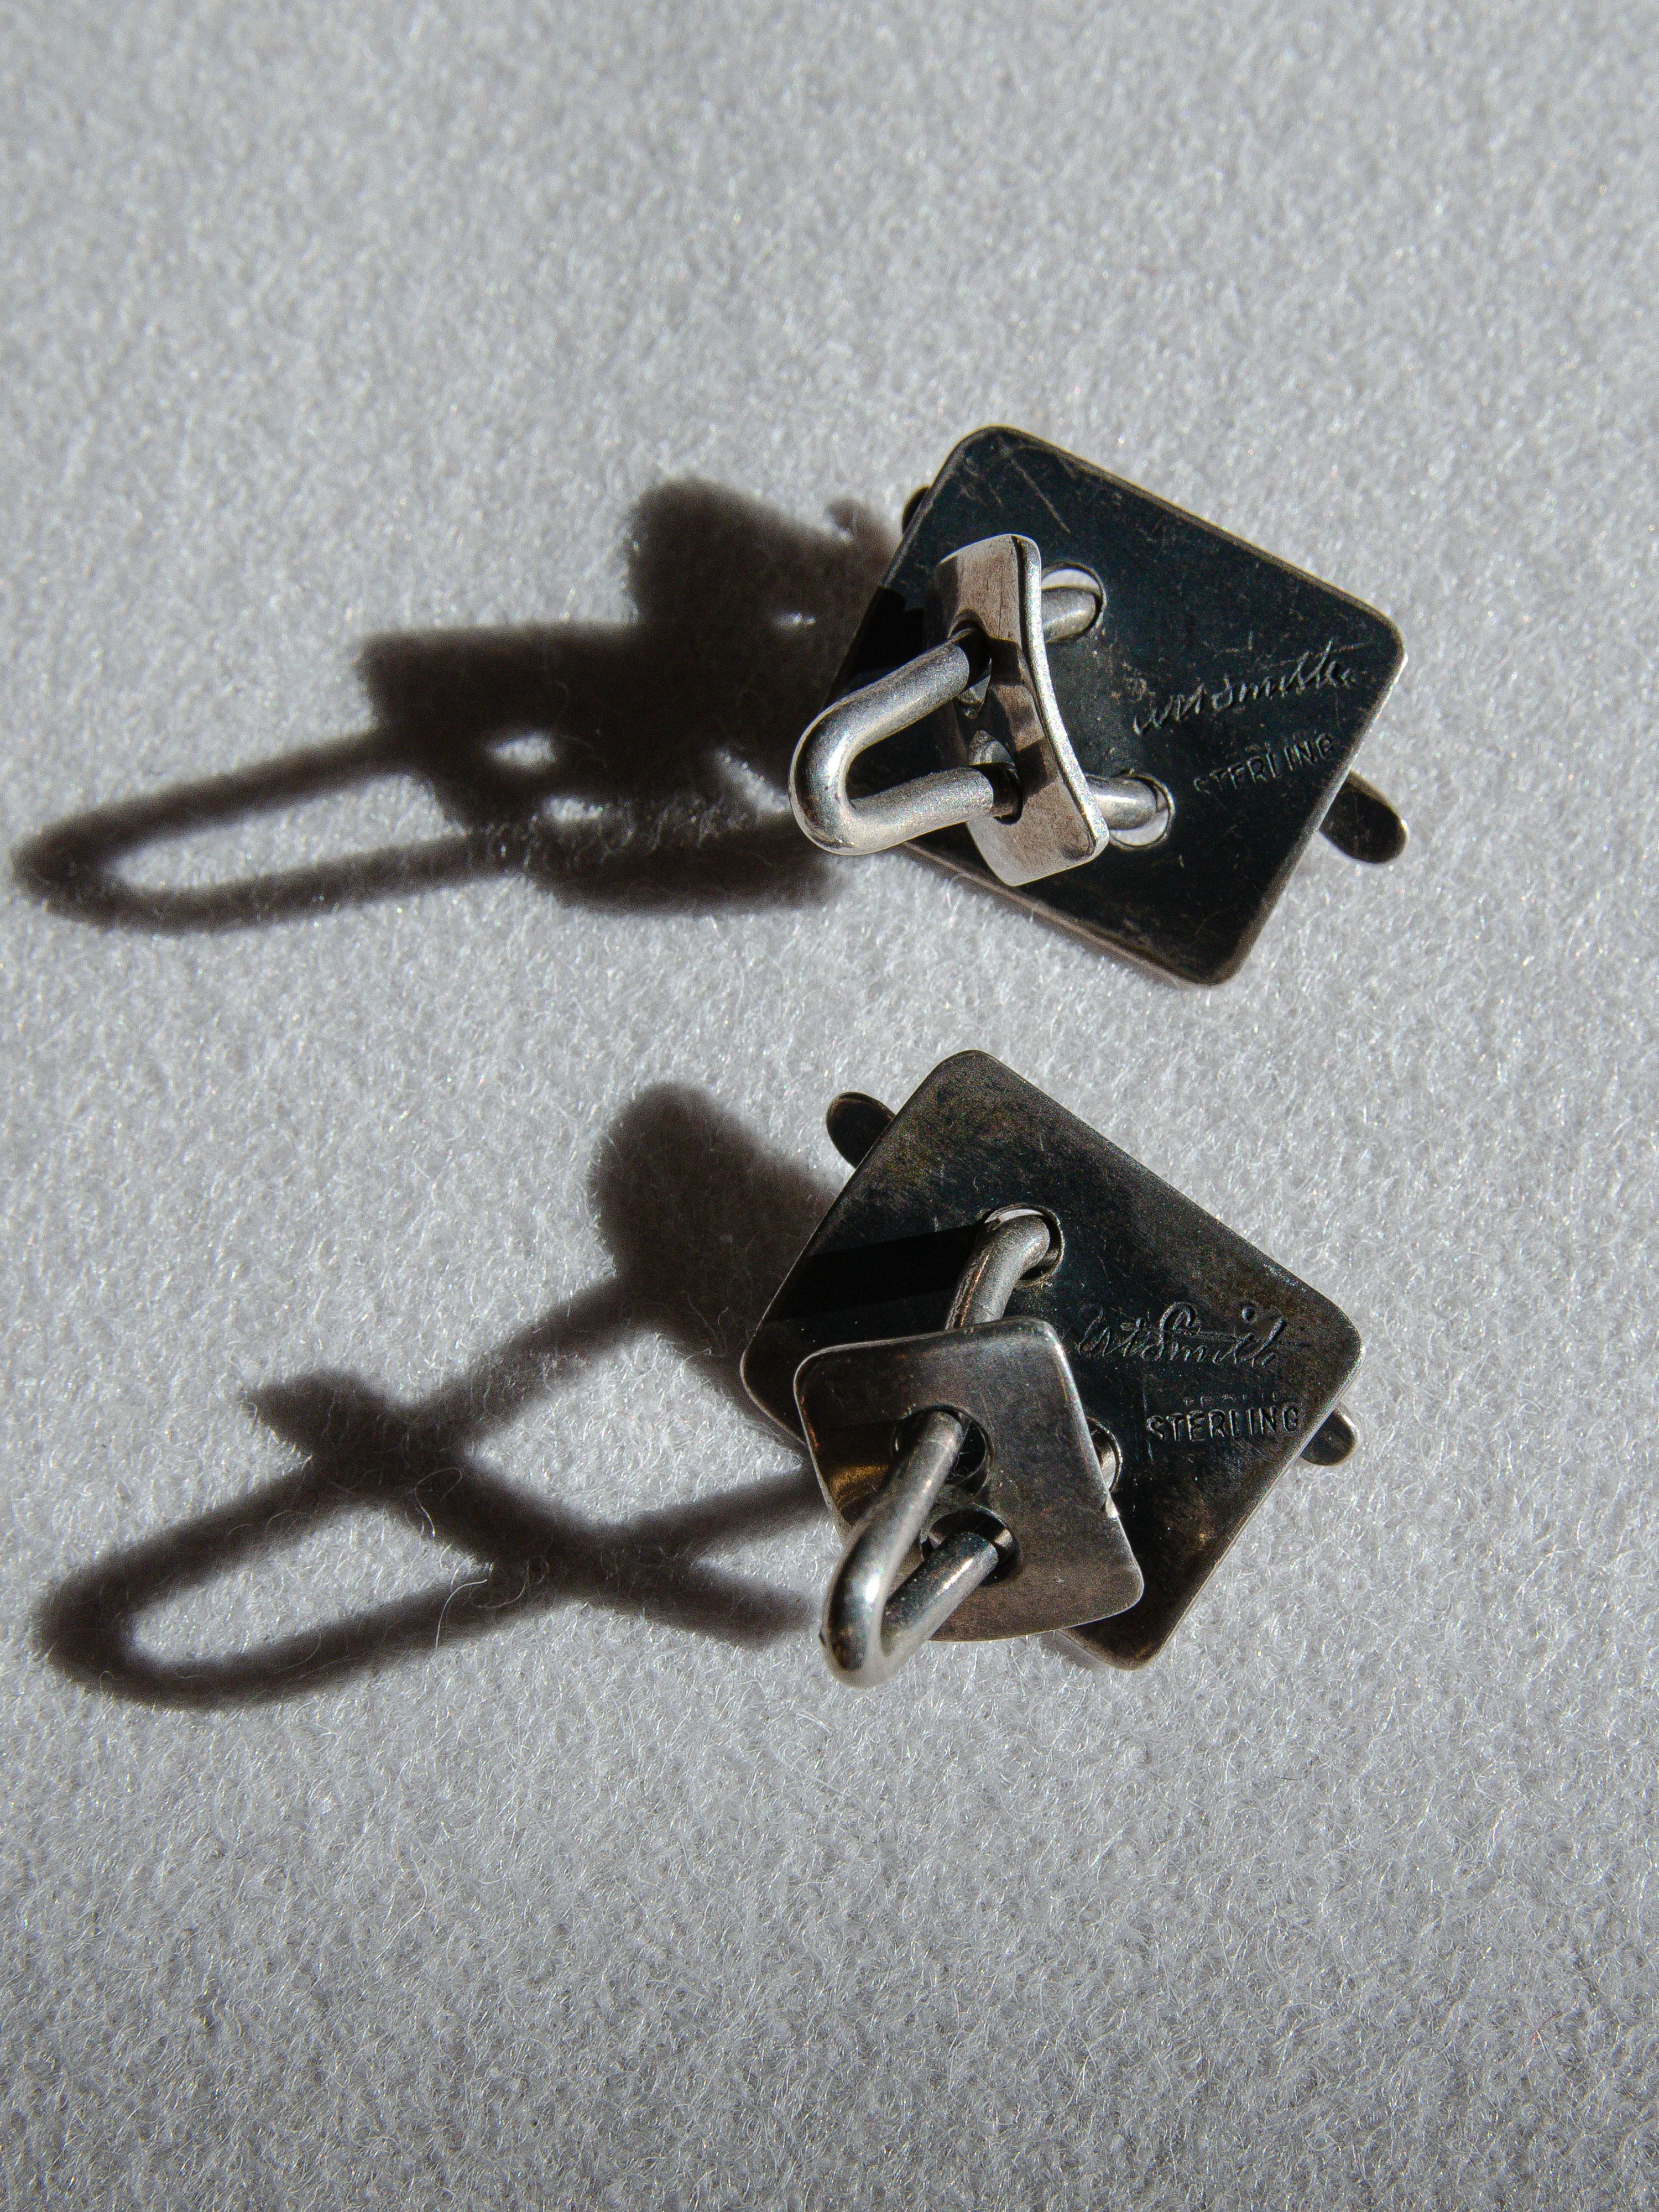 Hand-Crafted Rare pair of vintage mid-century modernist sterling silver cufflinks by Art Smit For Sale